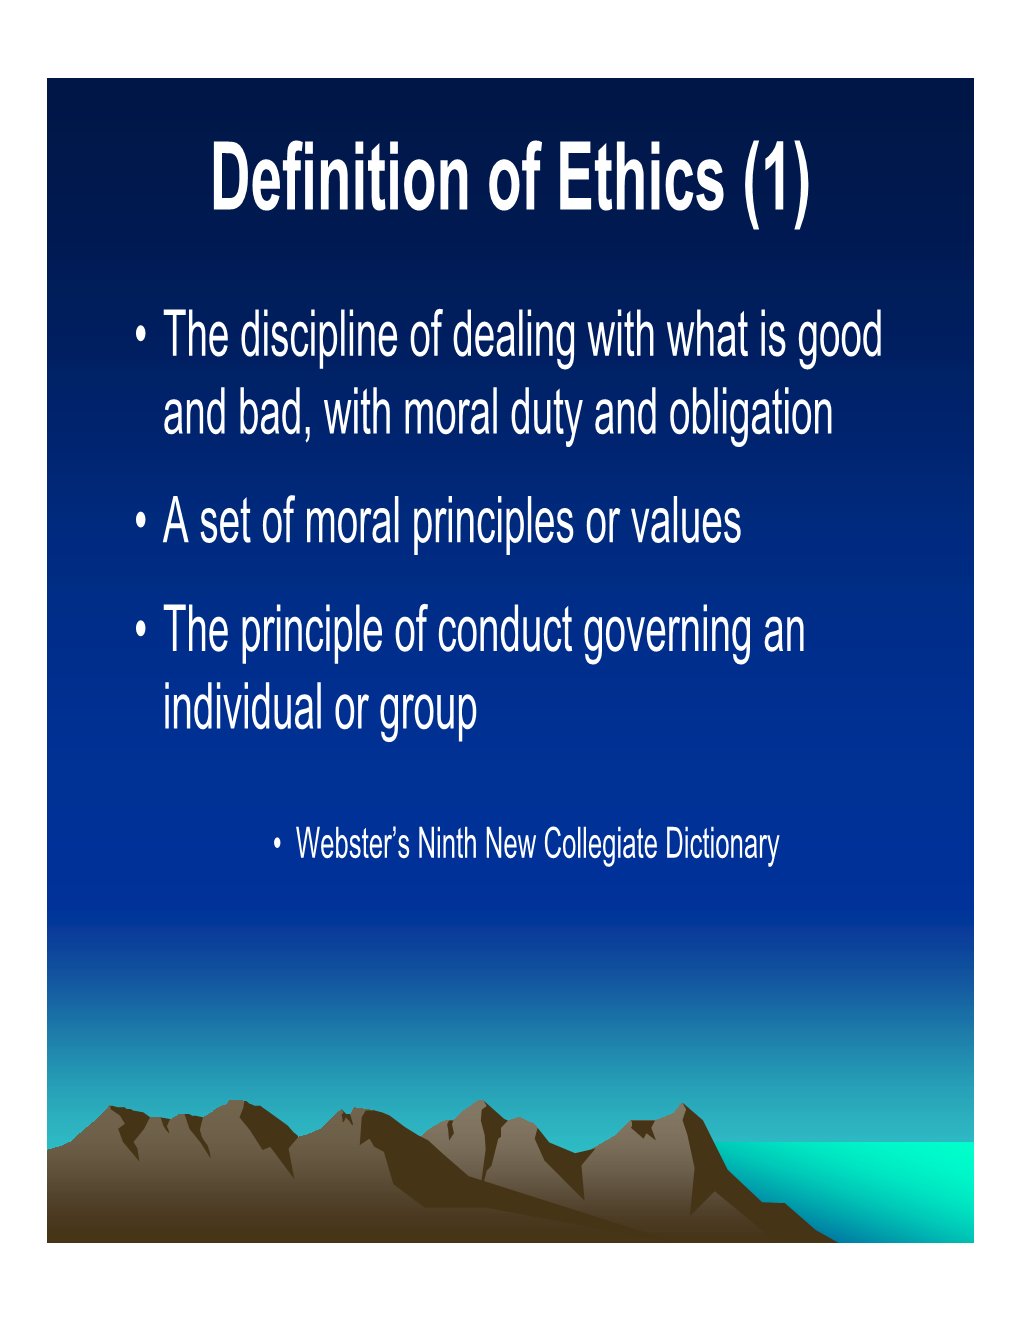 Definition of Ethics (1)